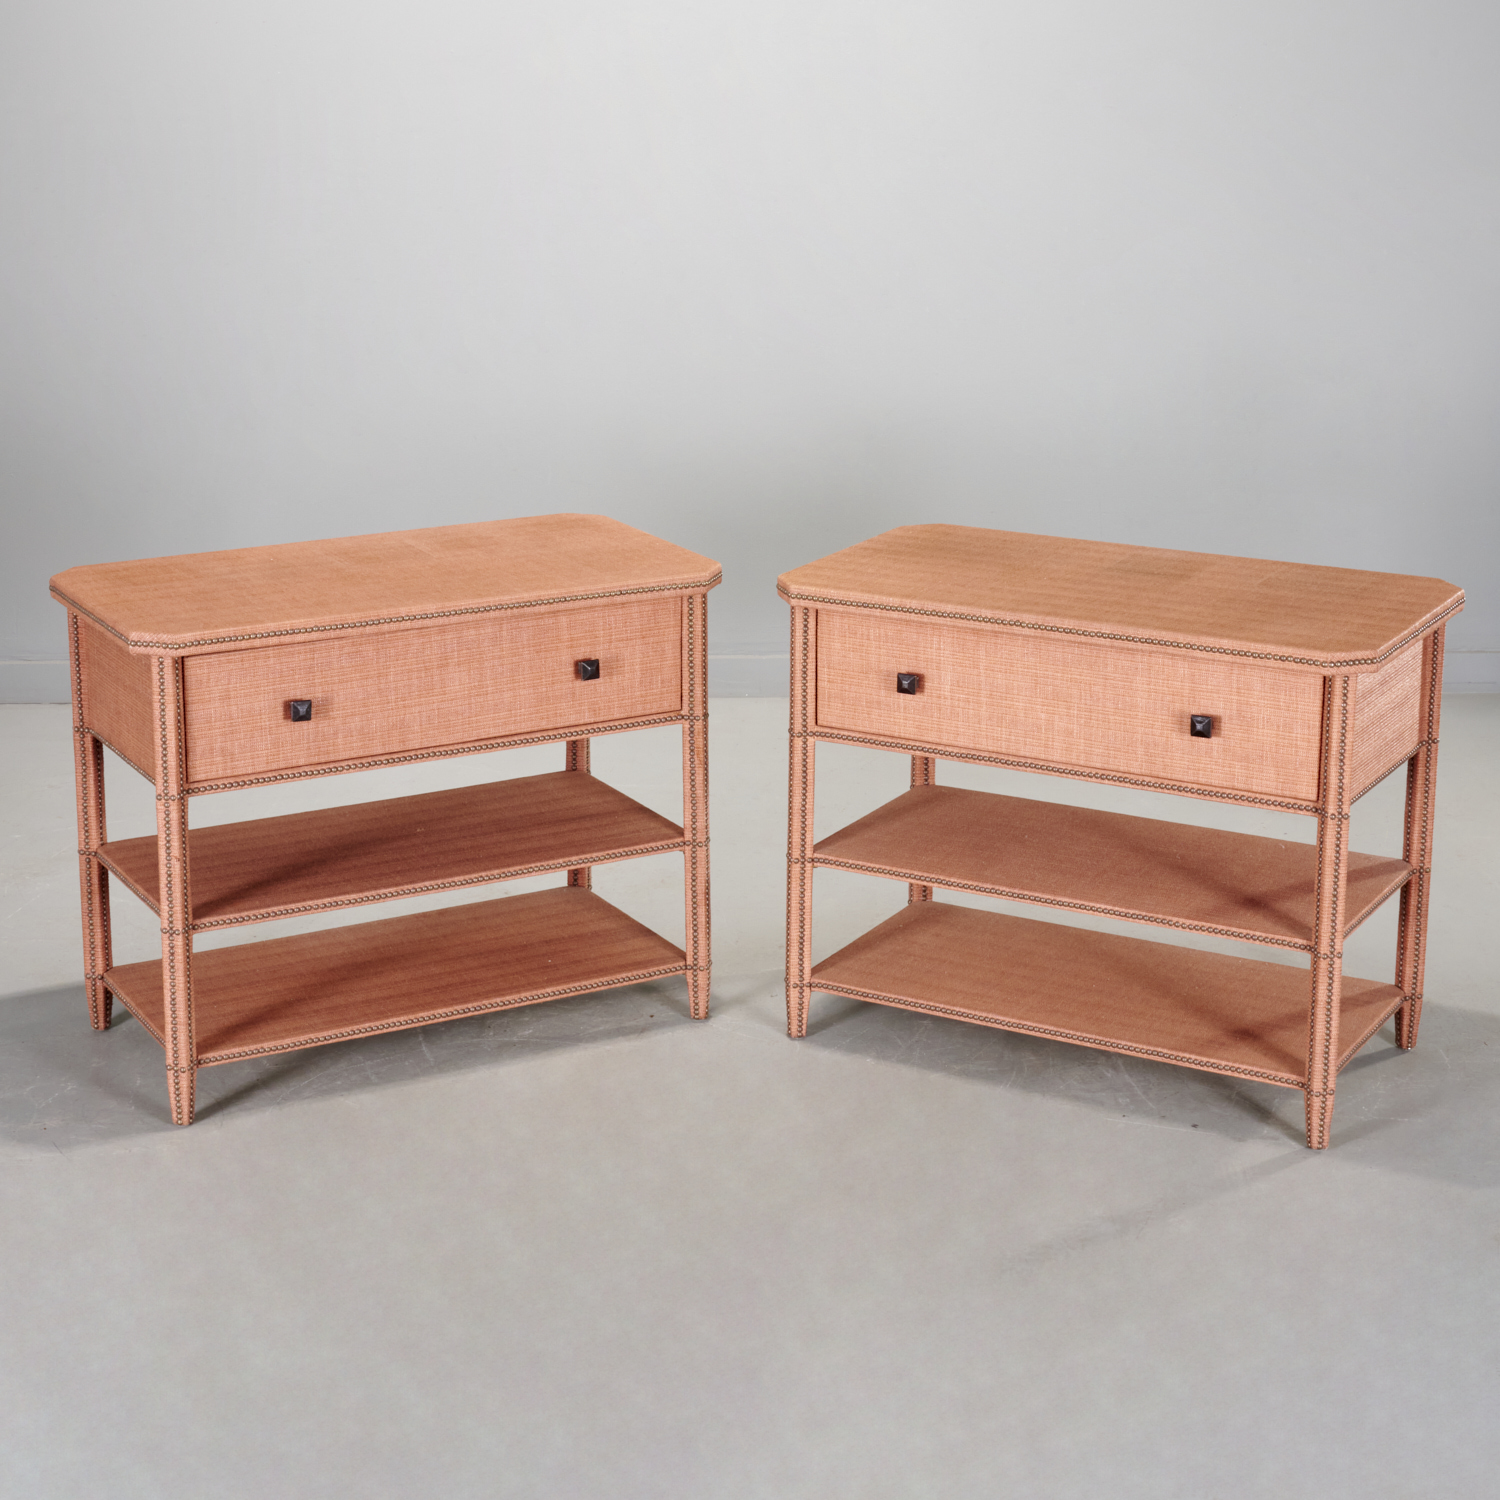 PAIR WOVEN STRAW CLAD BEDSIDE TABLES  29d250